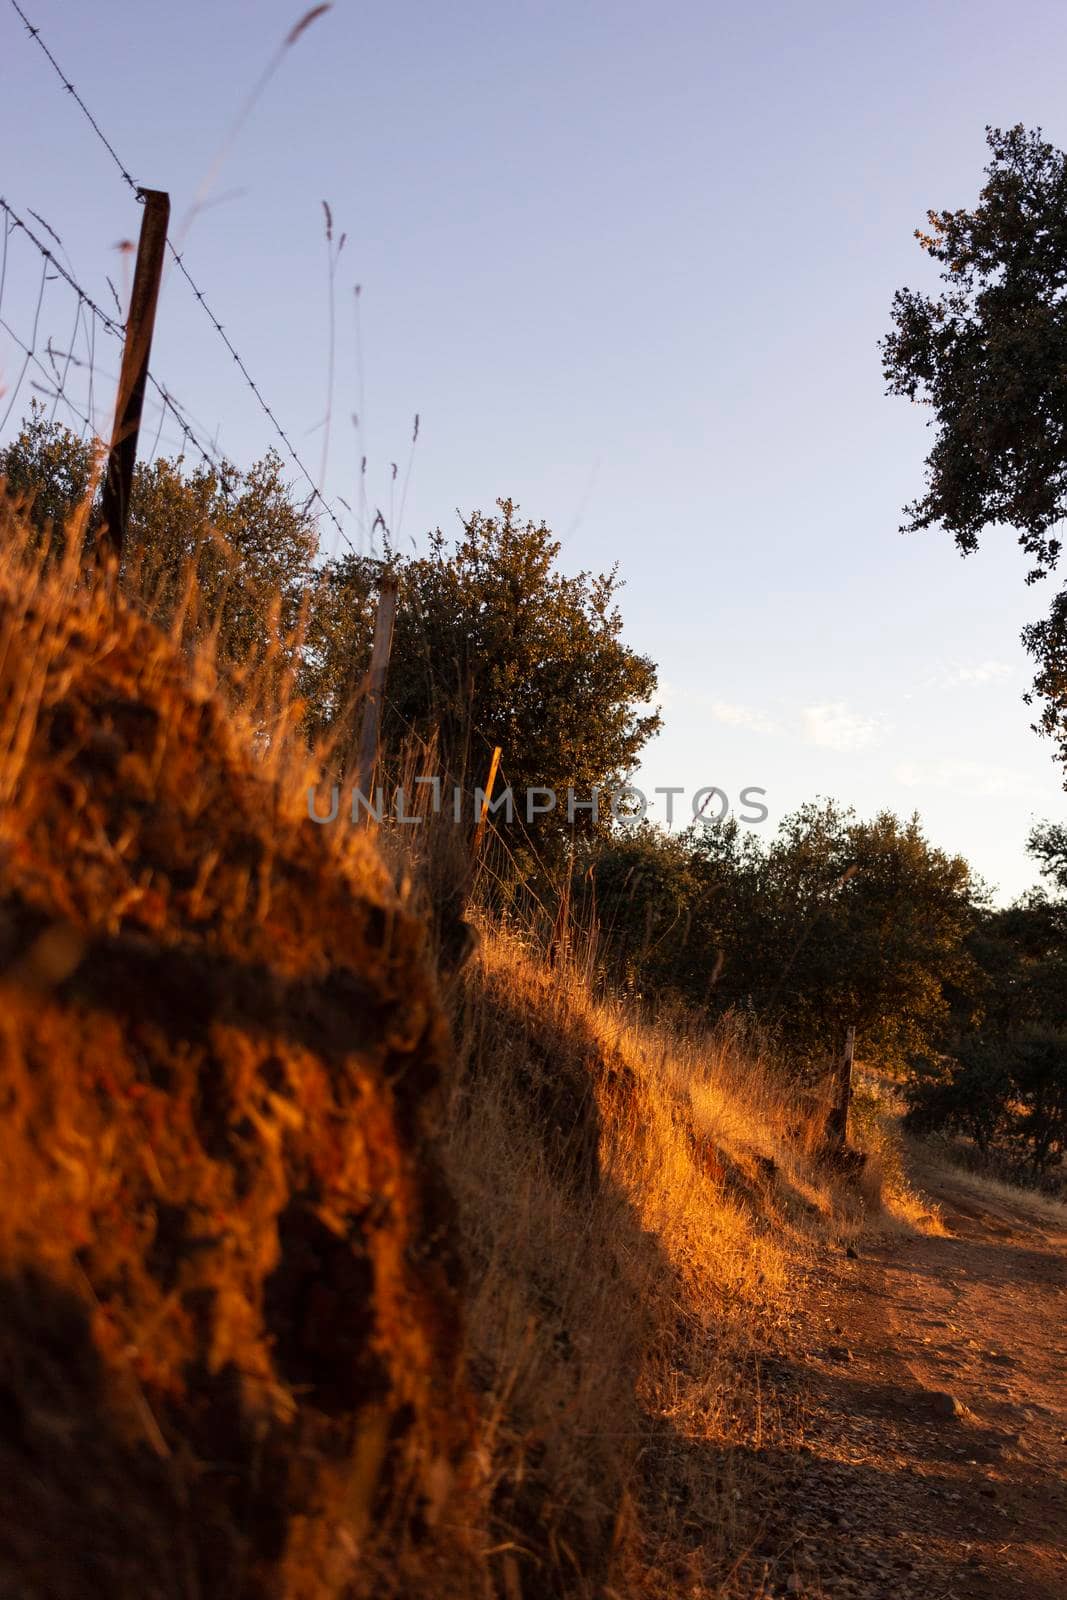 Dry land with vegetation in the golden hour in Spain by loopneo